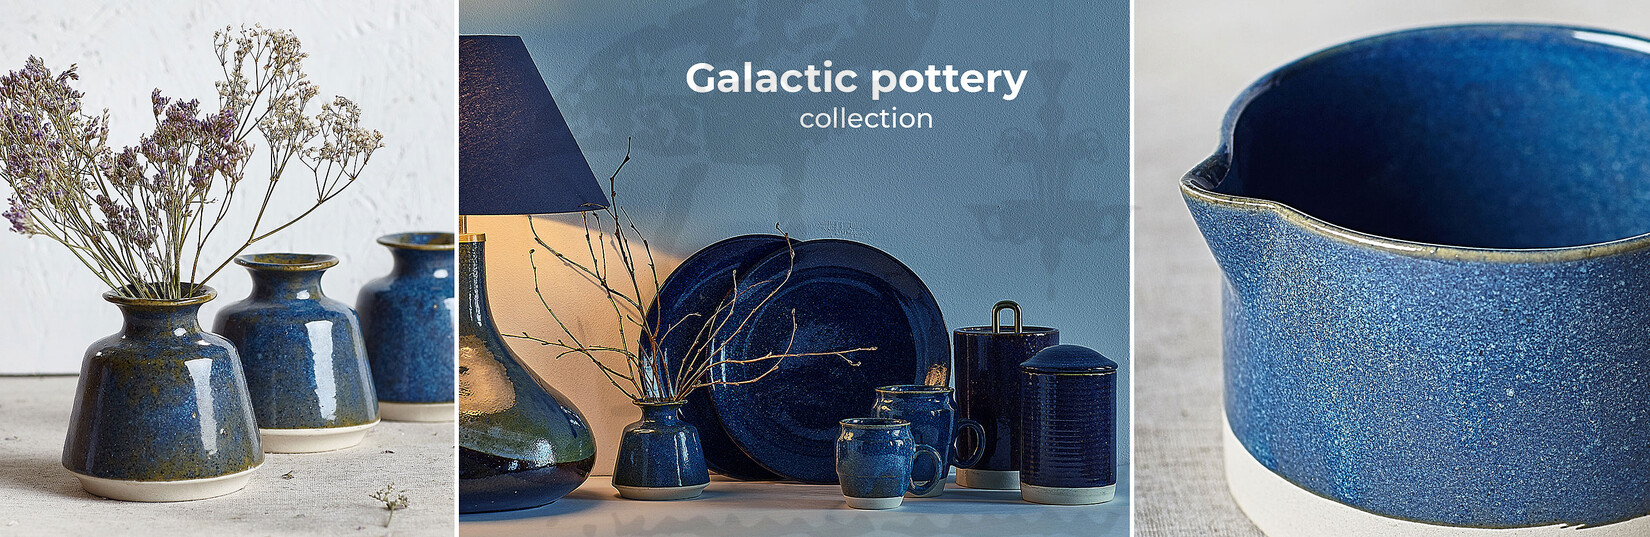 Galactic pottery